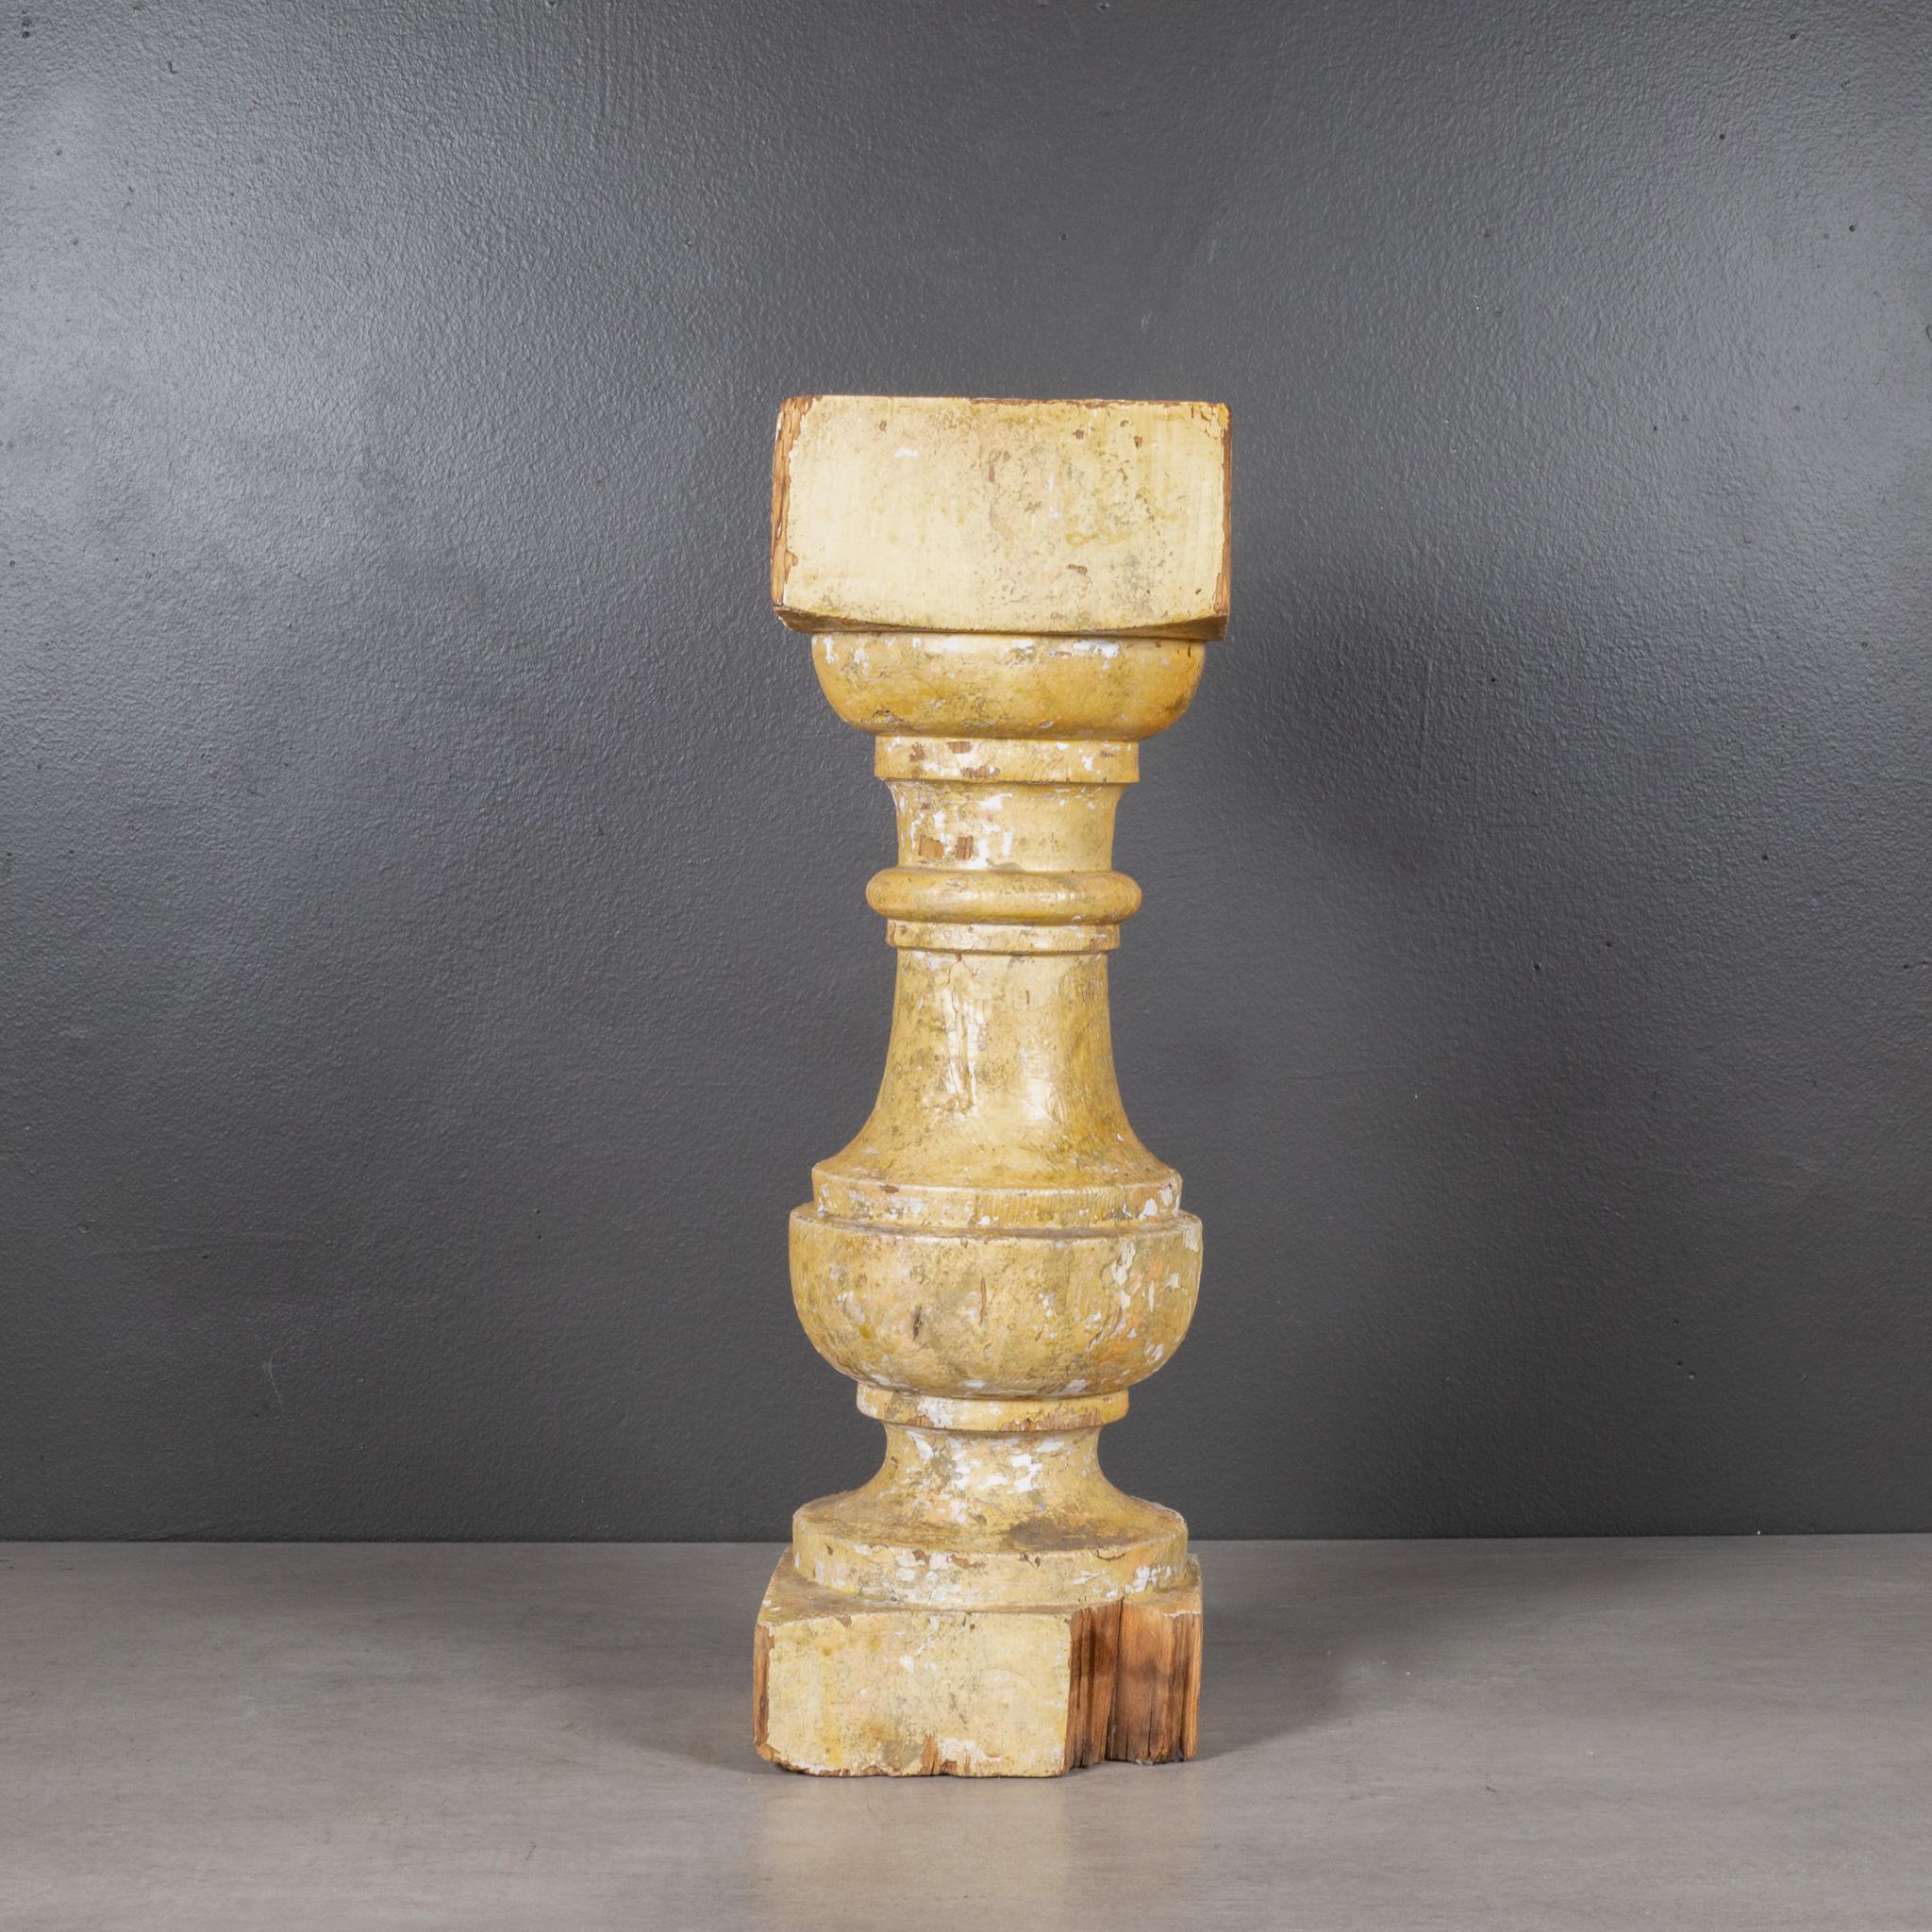 ABOUT

A distressed architectural column.

    CREATOR Unknown.
    DATE OF MANUFACTURE c.1940-1950.
    MATERIALS AND TECHNIQUES Wood.
    CONDITION Good. Wear consistent with age and use. Loss of paint. Loss of wood on base.
    DIMENSIONS H 17